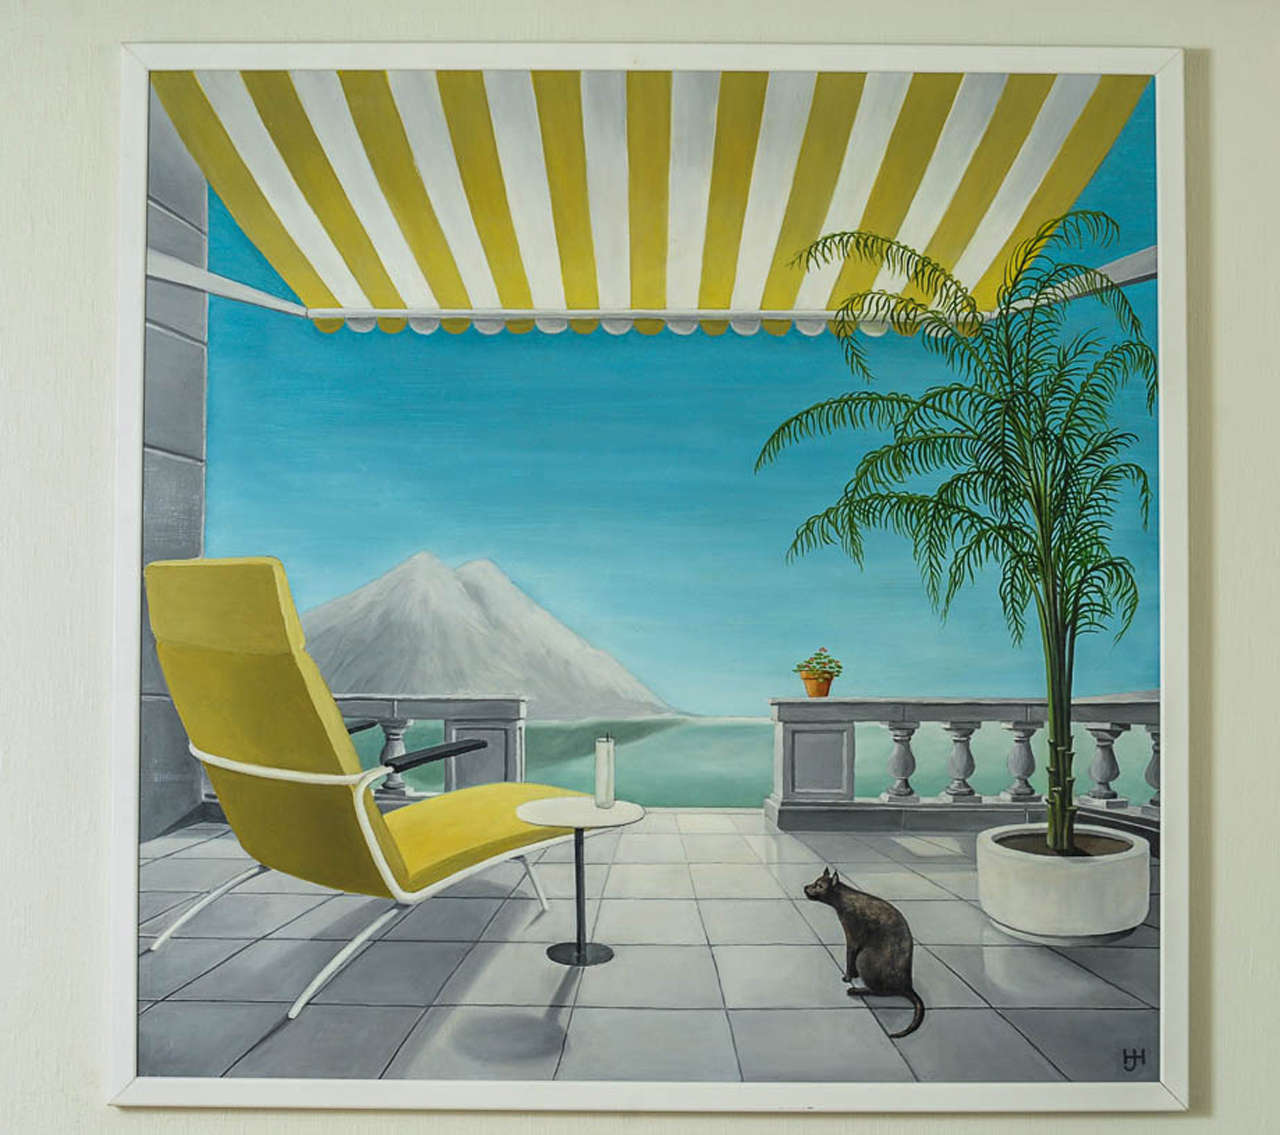 Marvelous painting by Jac. Haan, interior architect and former manager of the furniture department of the famous Dutch department store Metz en Co. 

The painting depicts a very relaxing site on the Mediterranean, in fresh blue, white and yellow